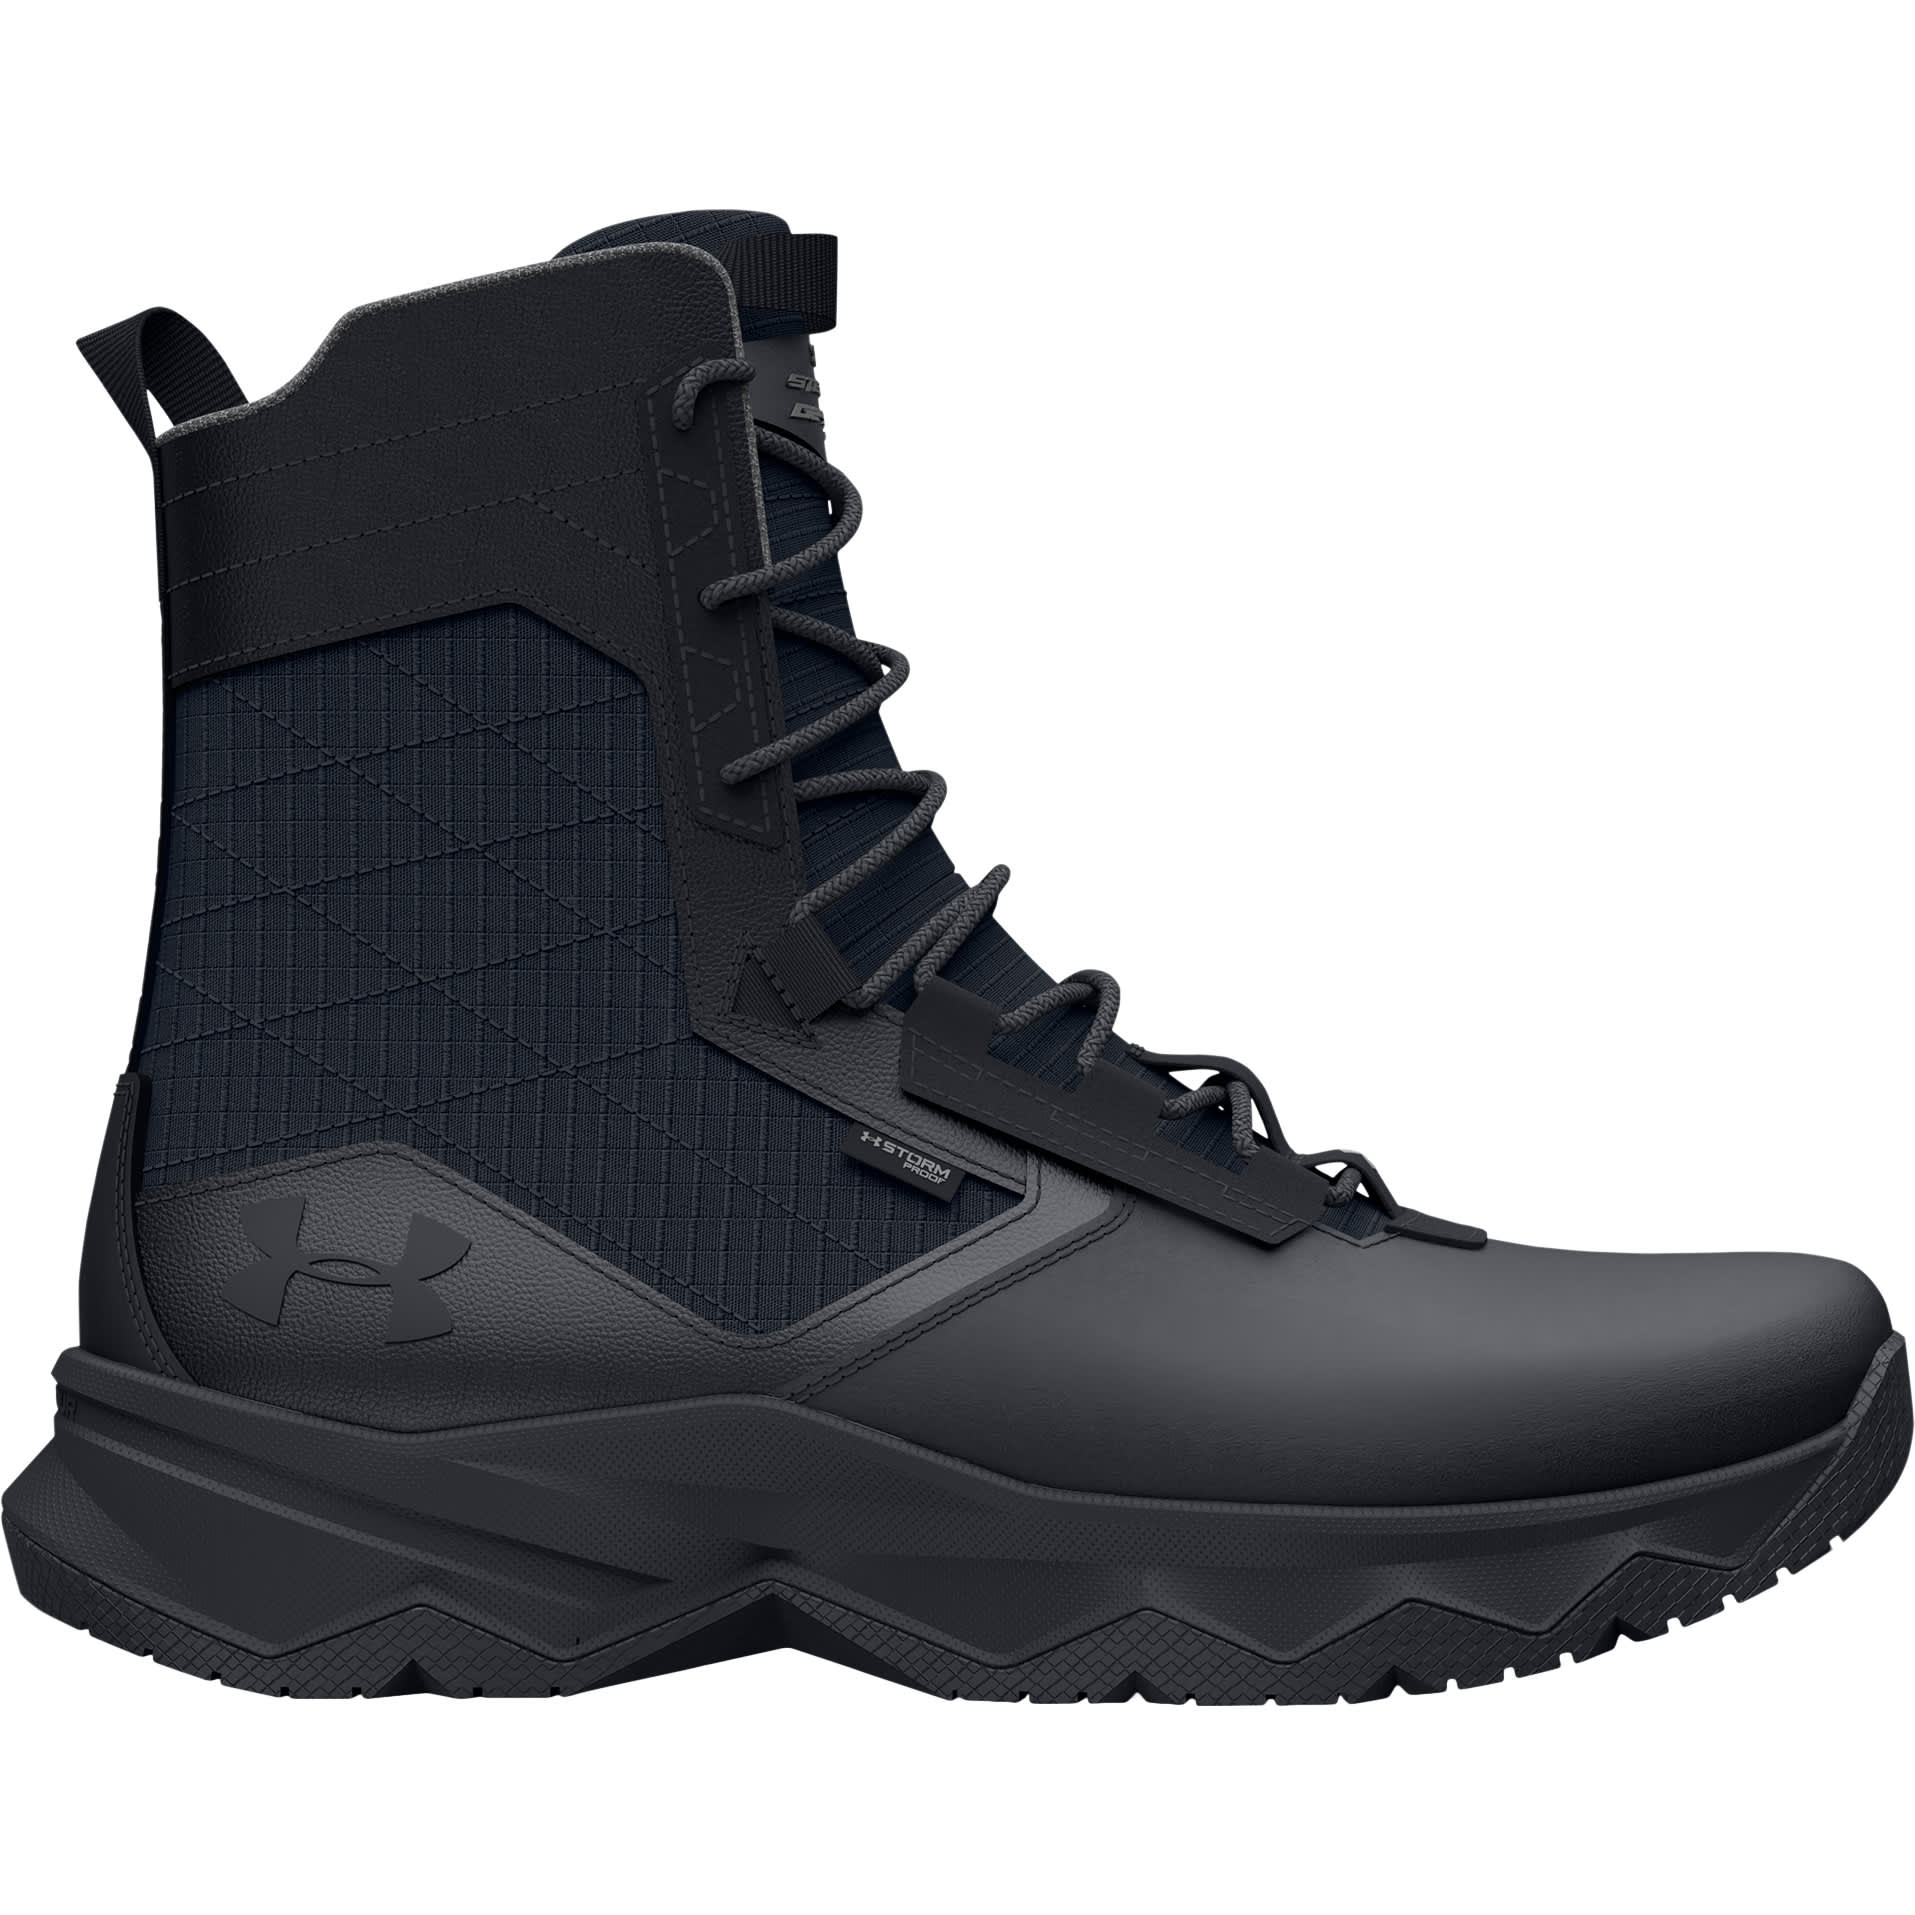 Under Armour UA Micro G Valsetz Mid Leather Waterproof Tactical Boots  3024334